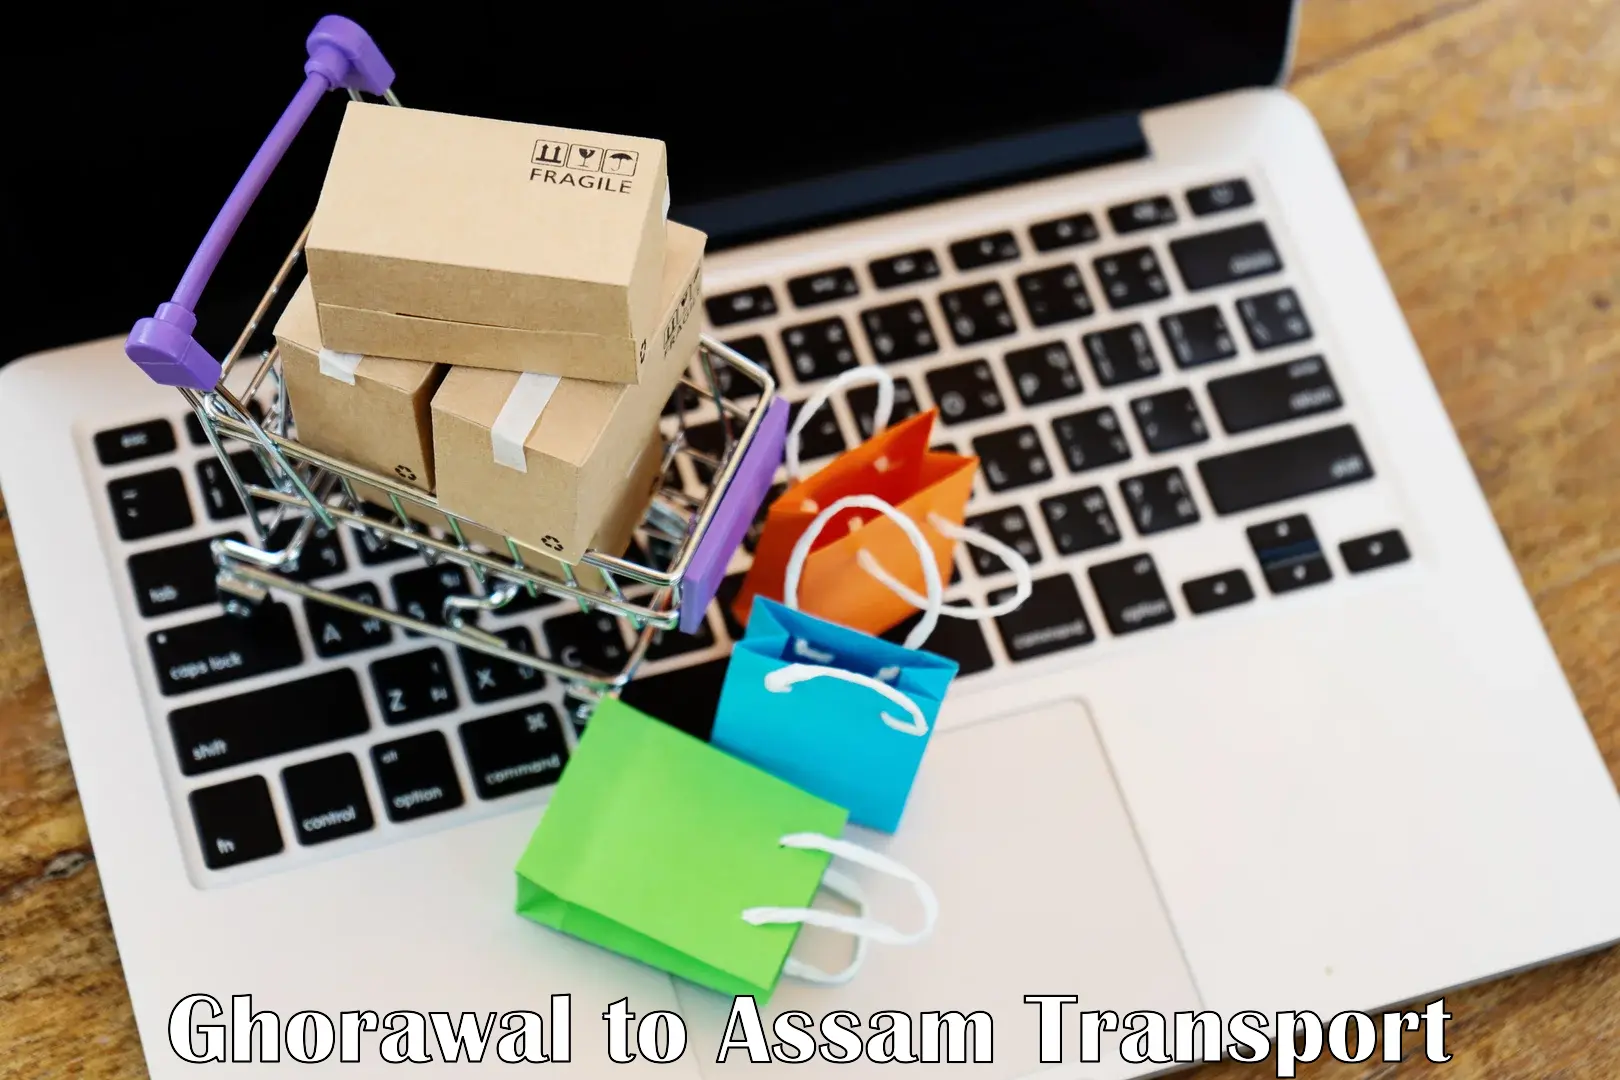 Material transport services in Ghorawal to Guwahati